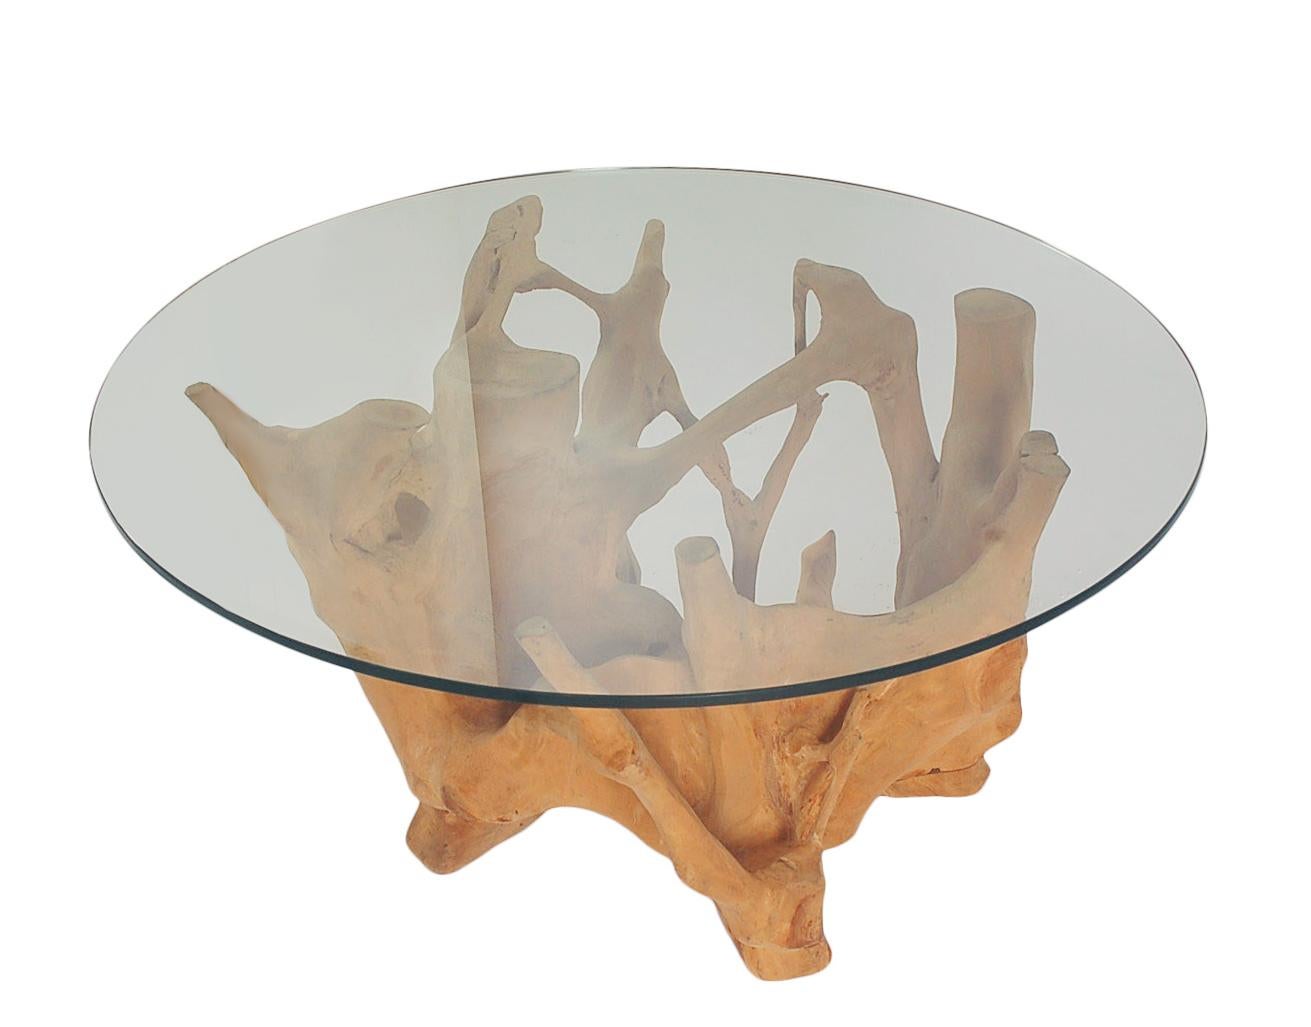 A sculptural organic teak root coffee table circa 1970's. It features a light colored wood teak base with a thick clear glass top.